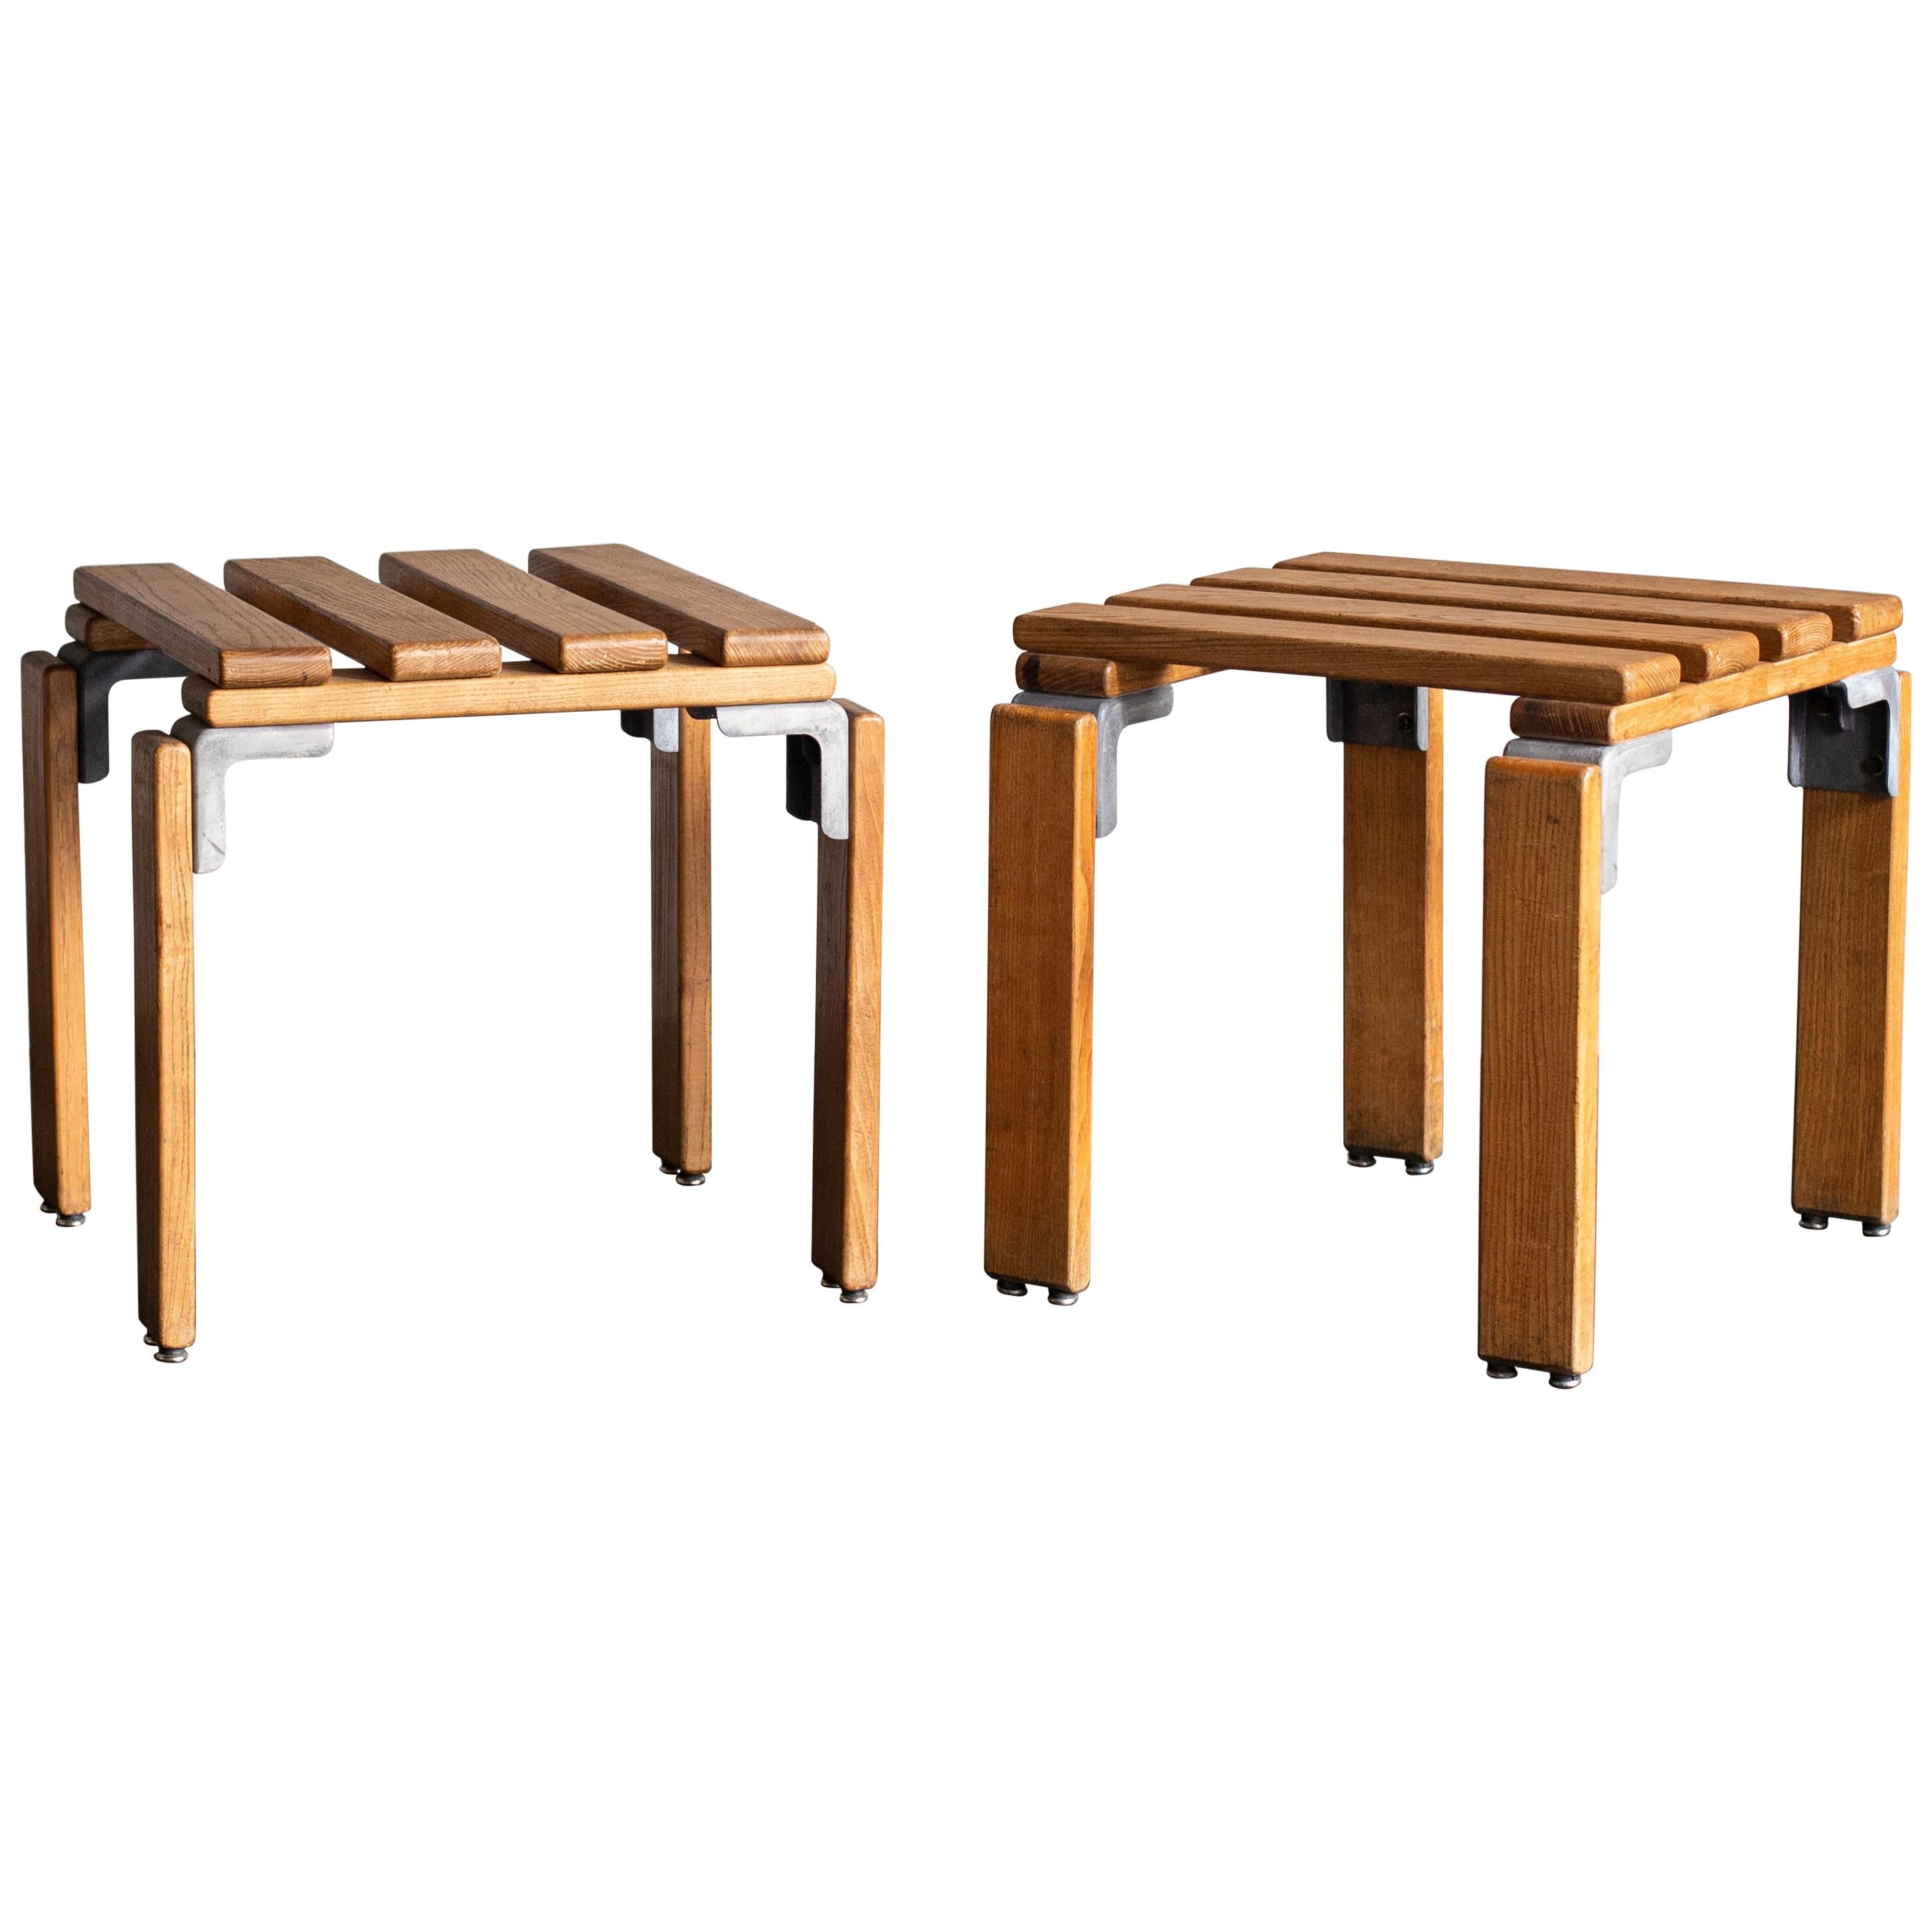 Georges Candilis & Anja Blomstedt, Pair of Stools, Sentou, 1969